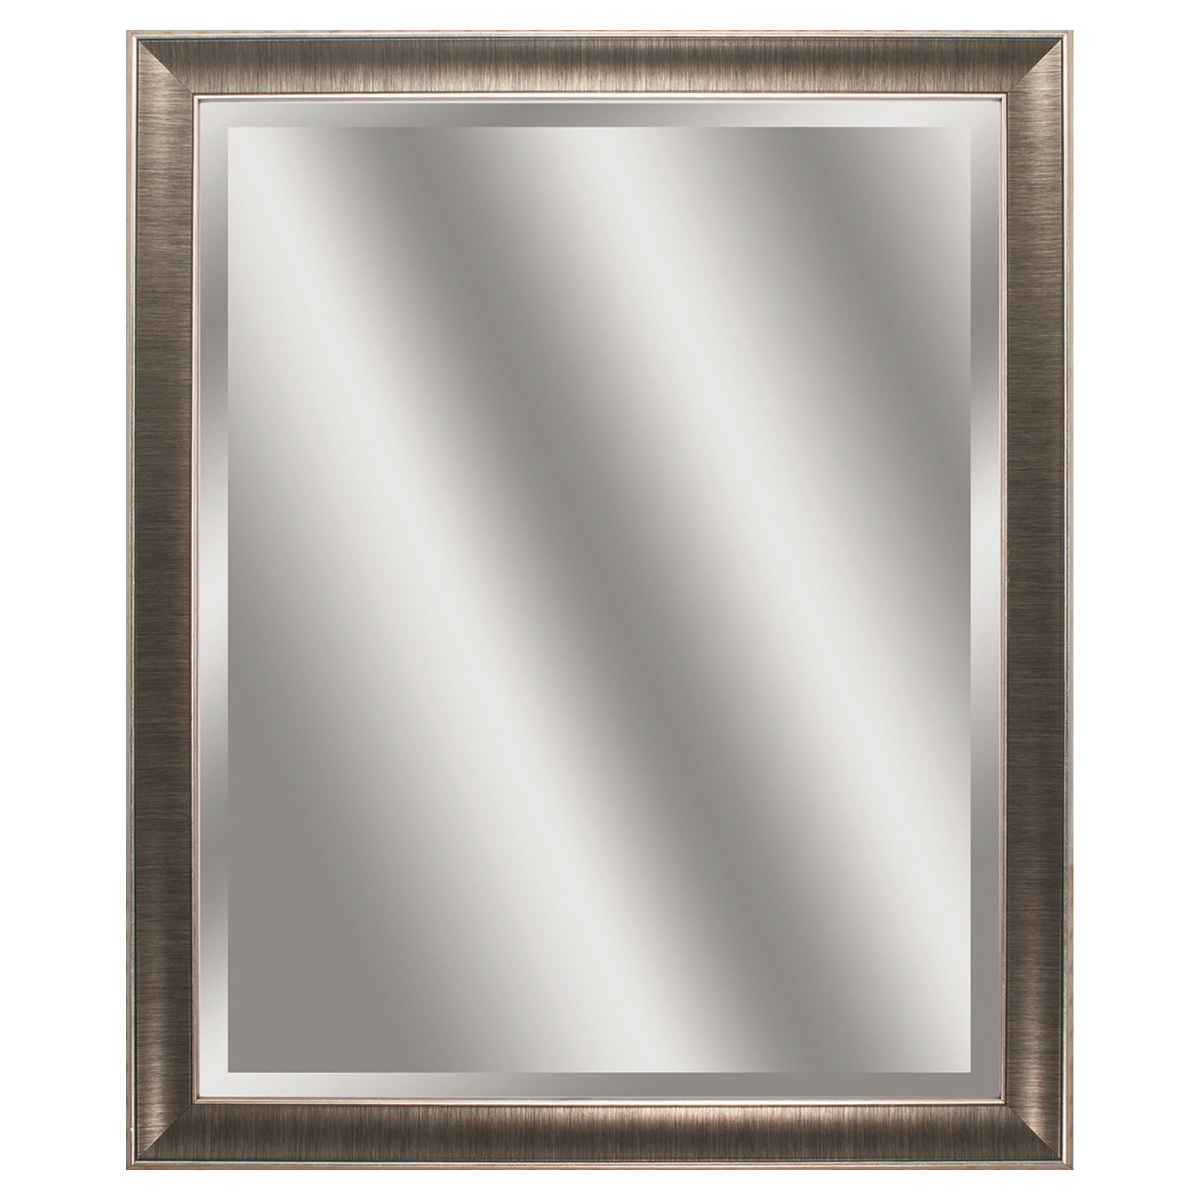 Picture of Propac Images 9942 Beveled Mirror - Gunmetal Gray Frame